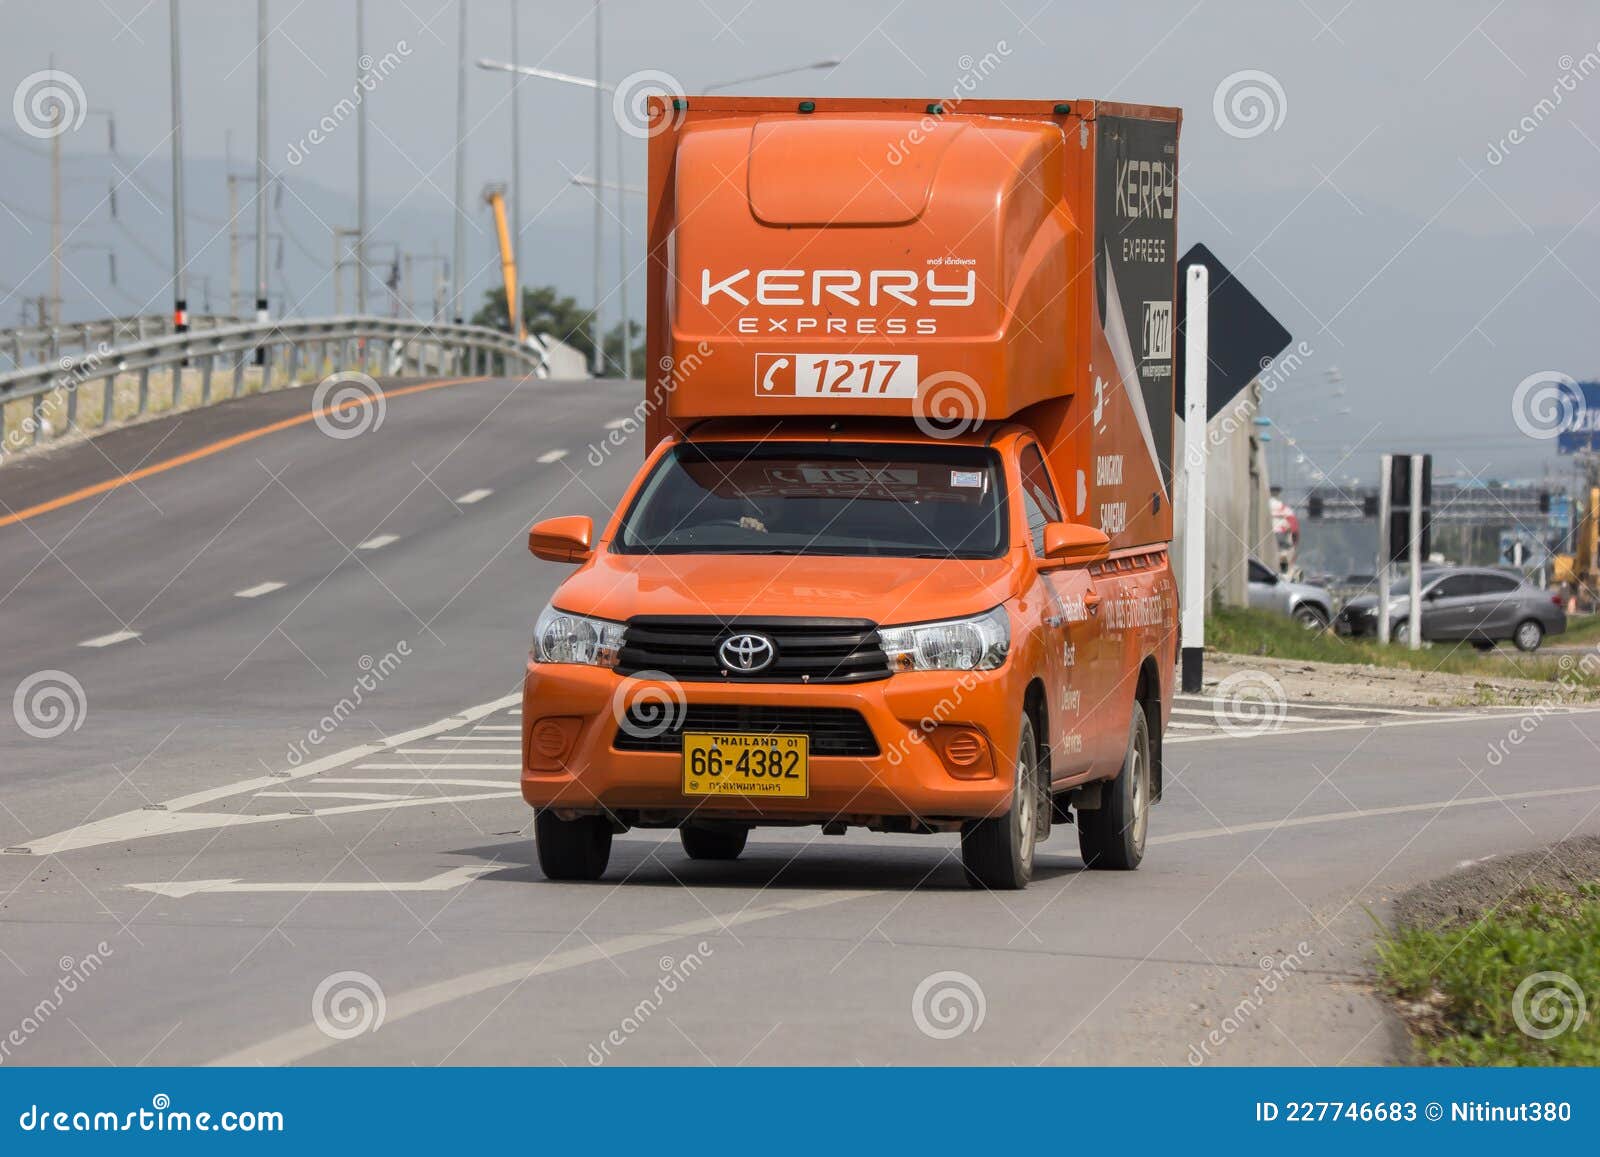 Kerry Logistic Container Pickup  Truck  Editorial Stock 